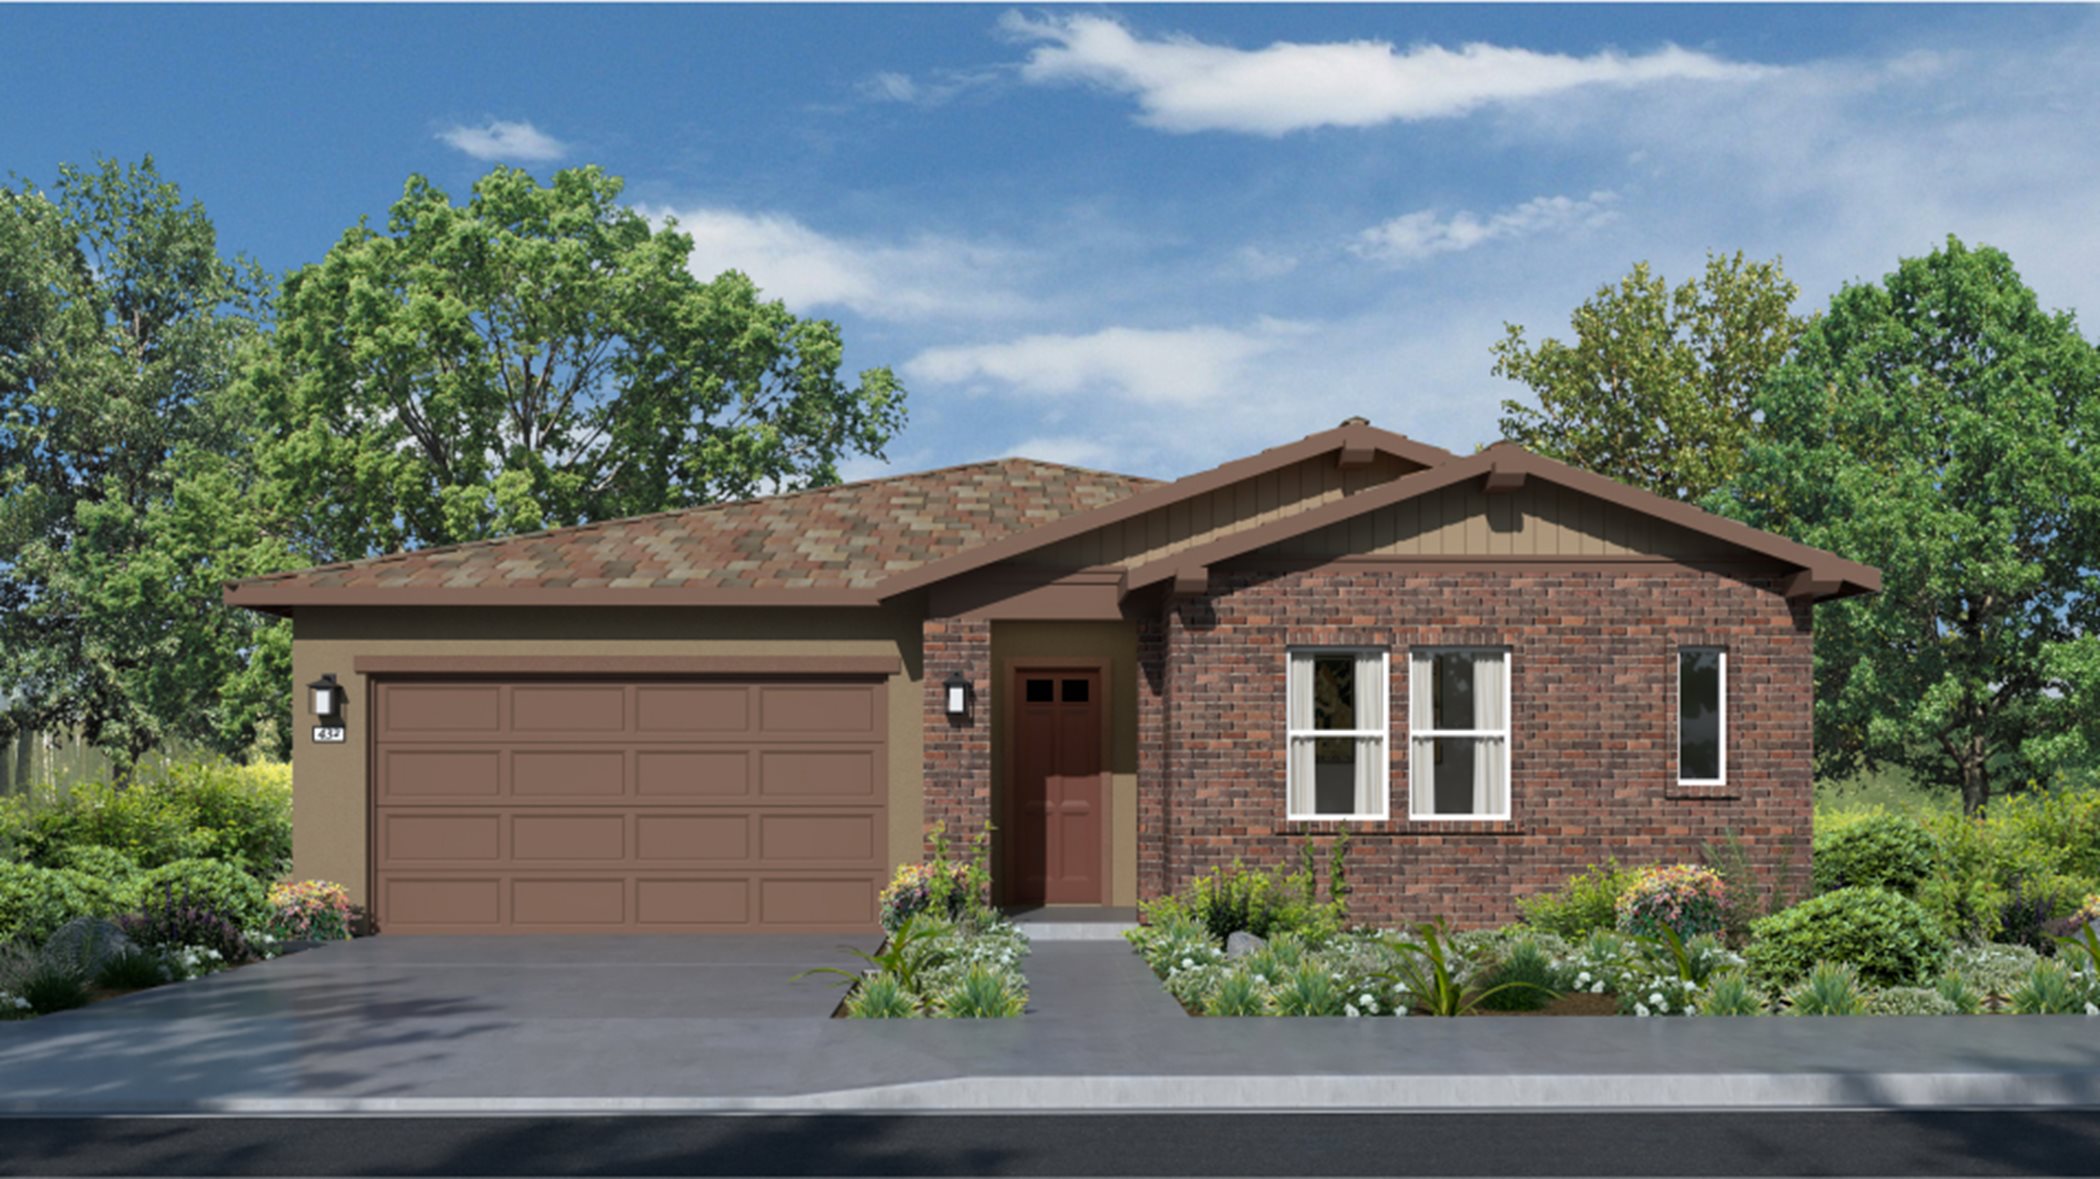 Territorial Ranch style home rendering